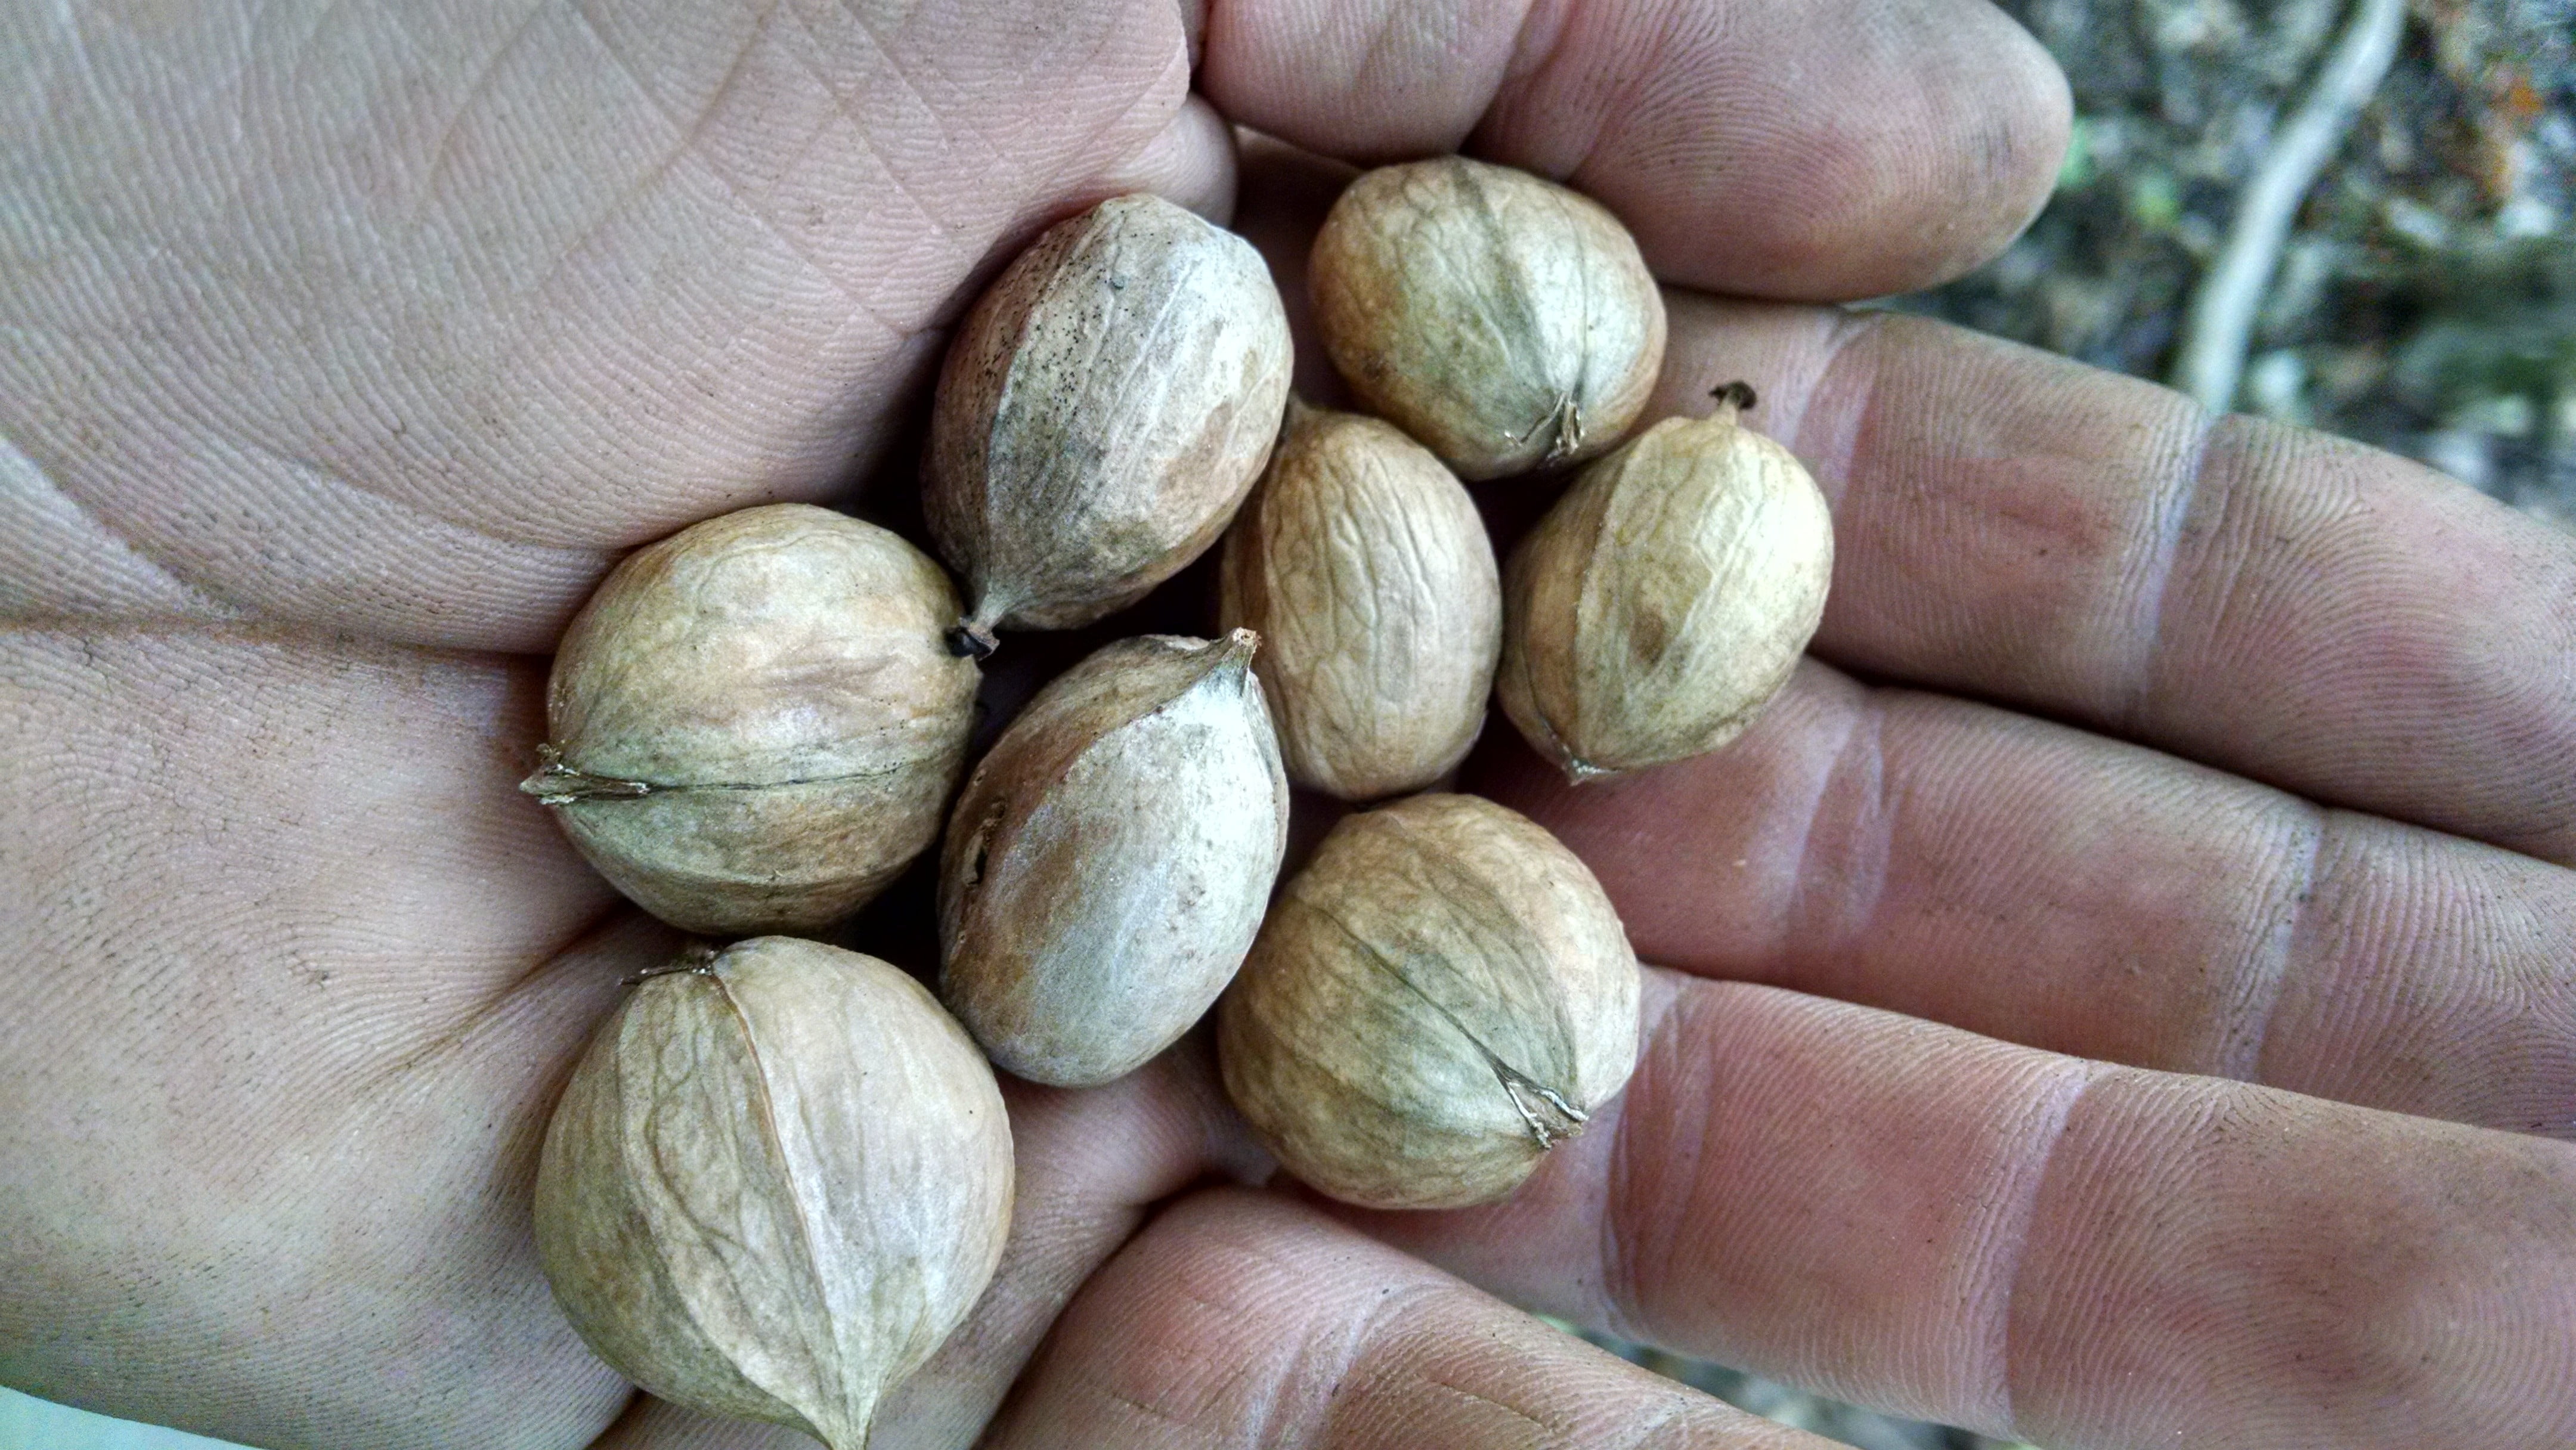 Both varieties of nuts have kernels about the same size after the hull is removed.